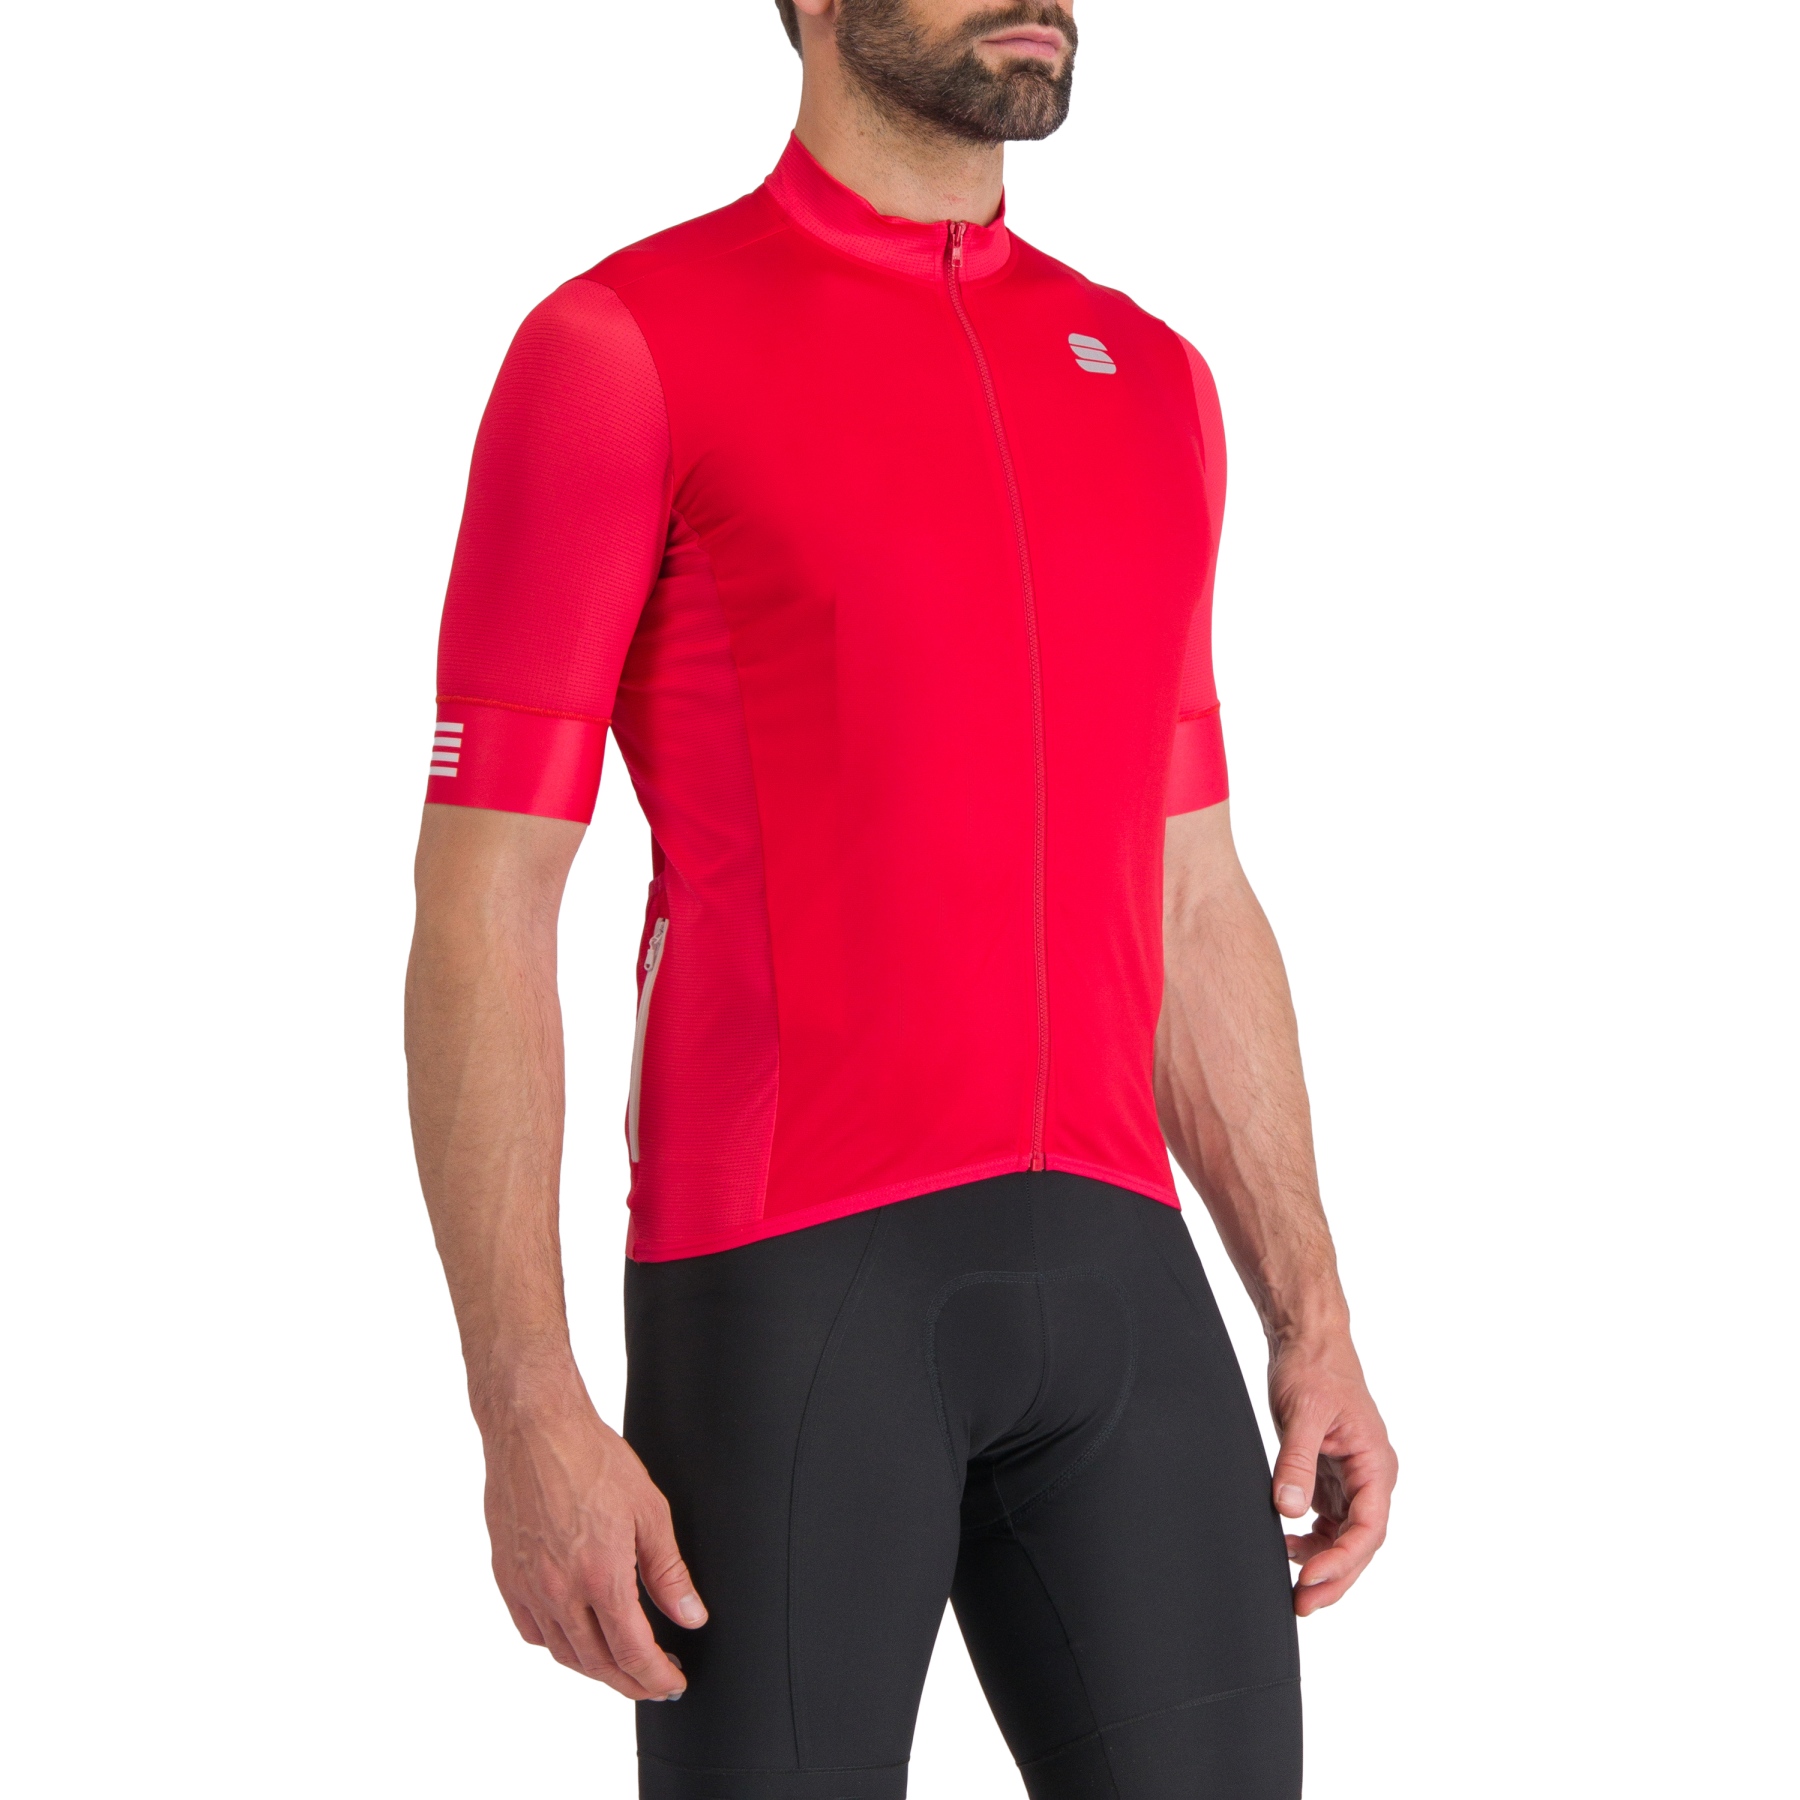 Picture of Sportful Srk Jersey Men - 638 Tango Red